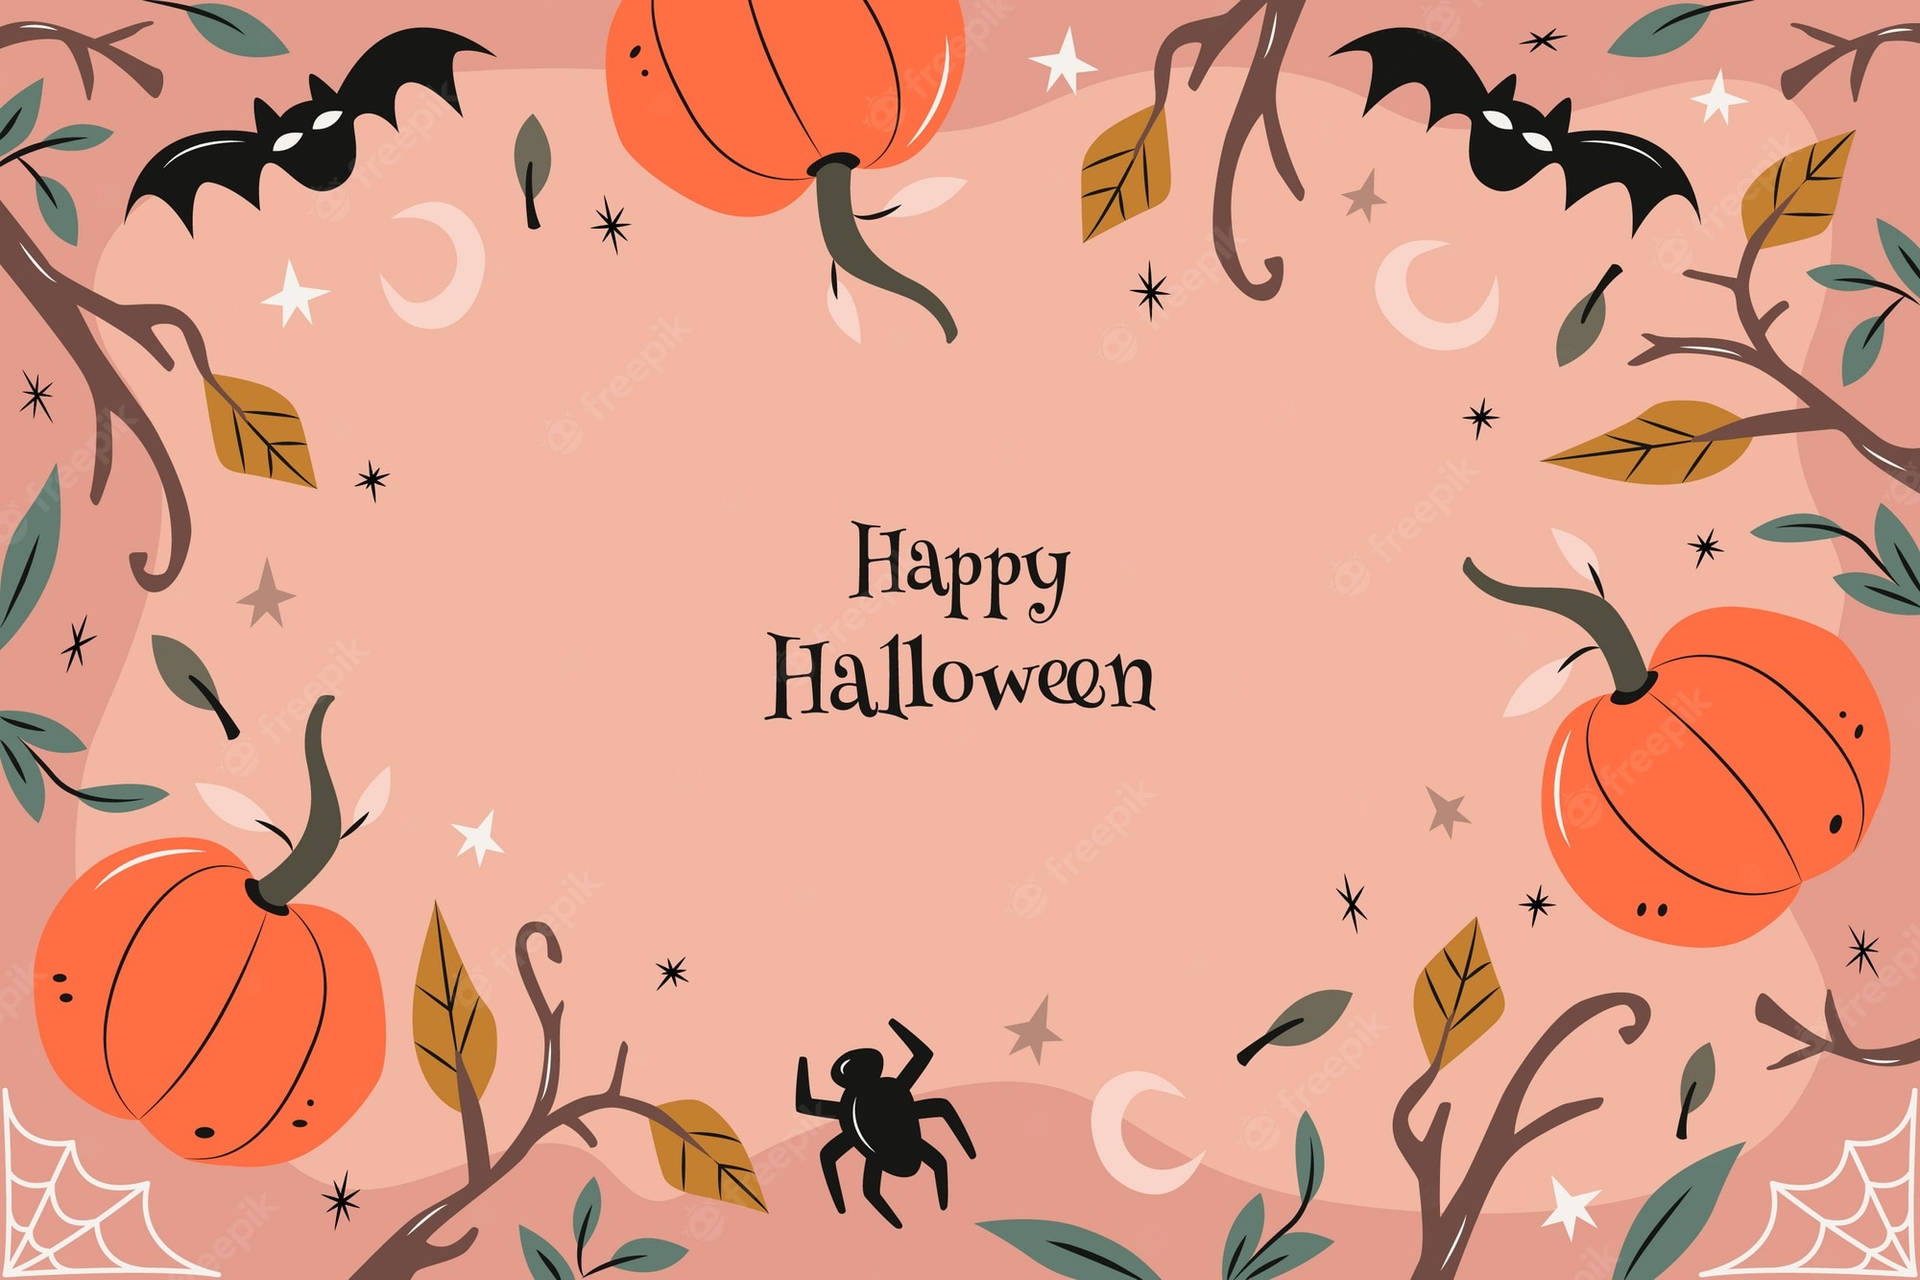 Embrace the spirit of Halloween this spooky season and spread some joy Wallpaper